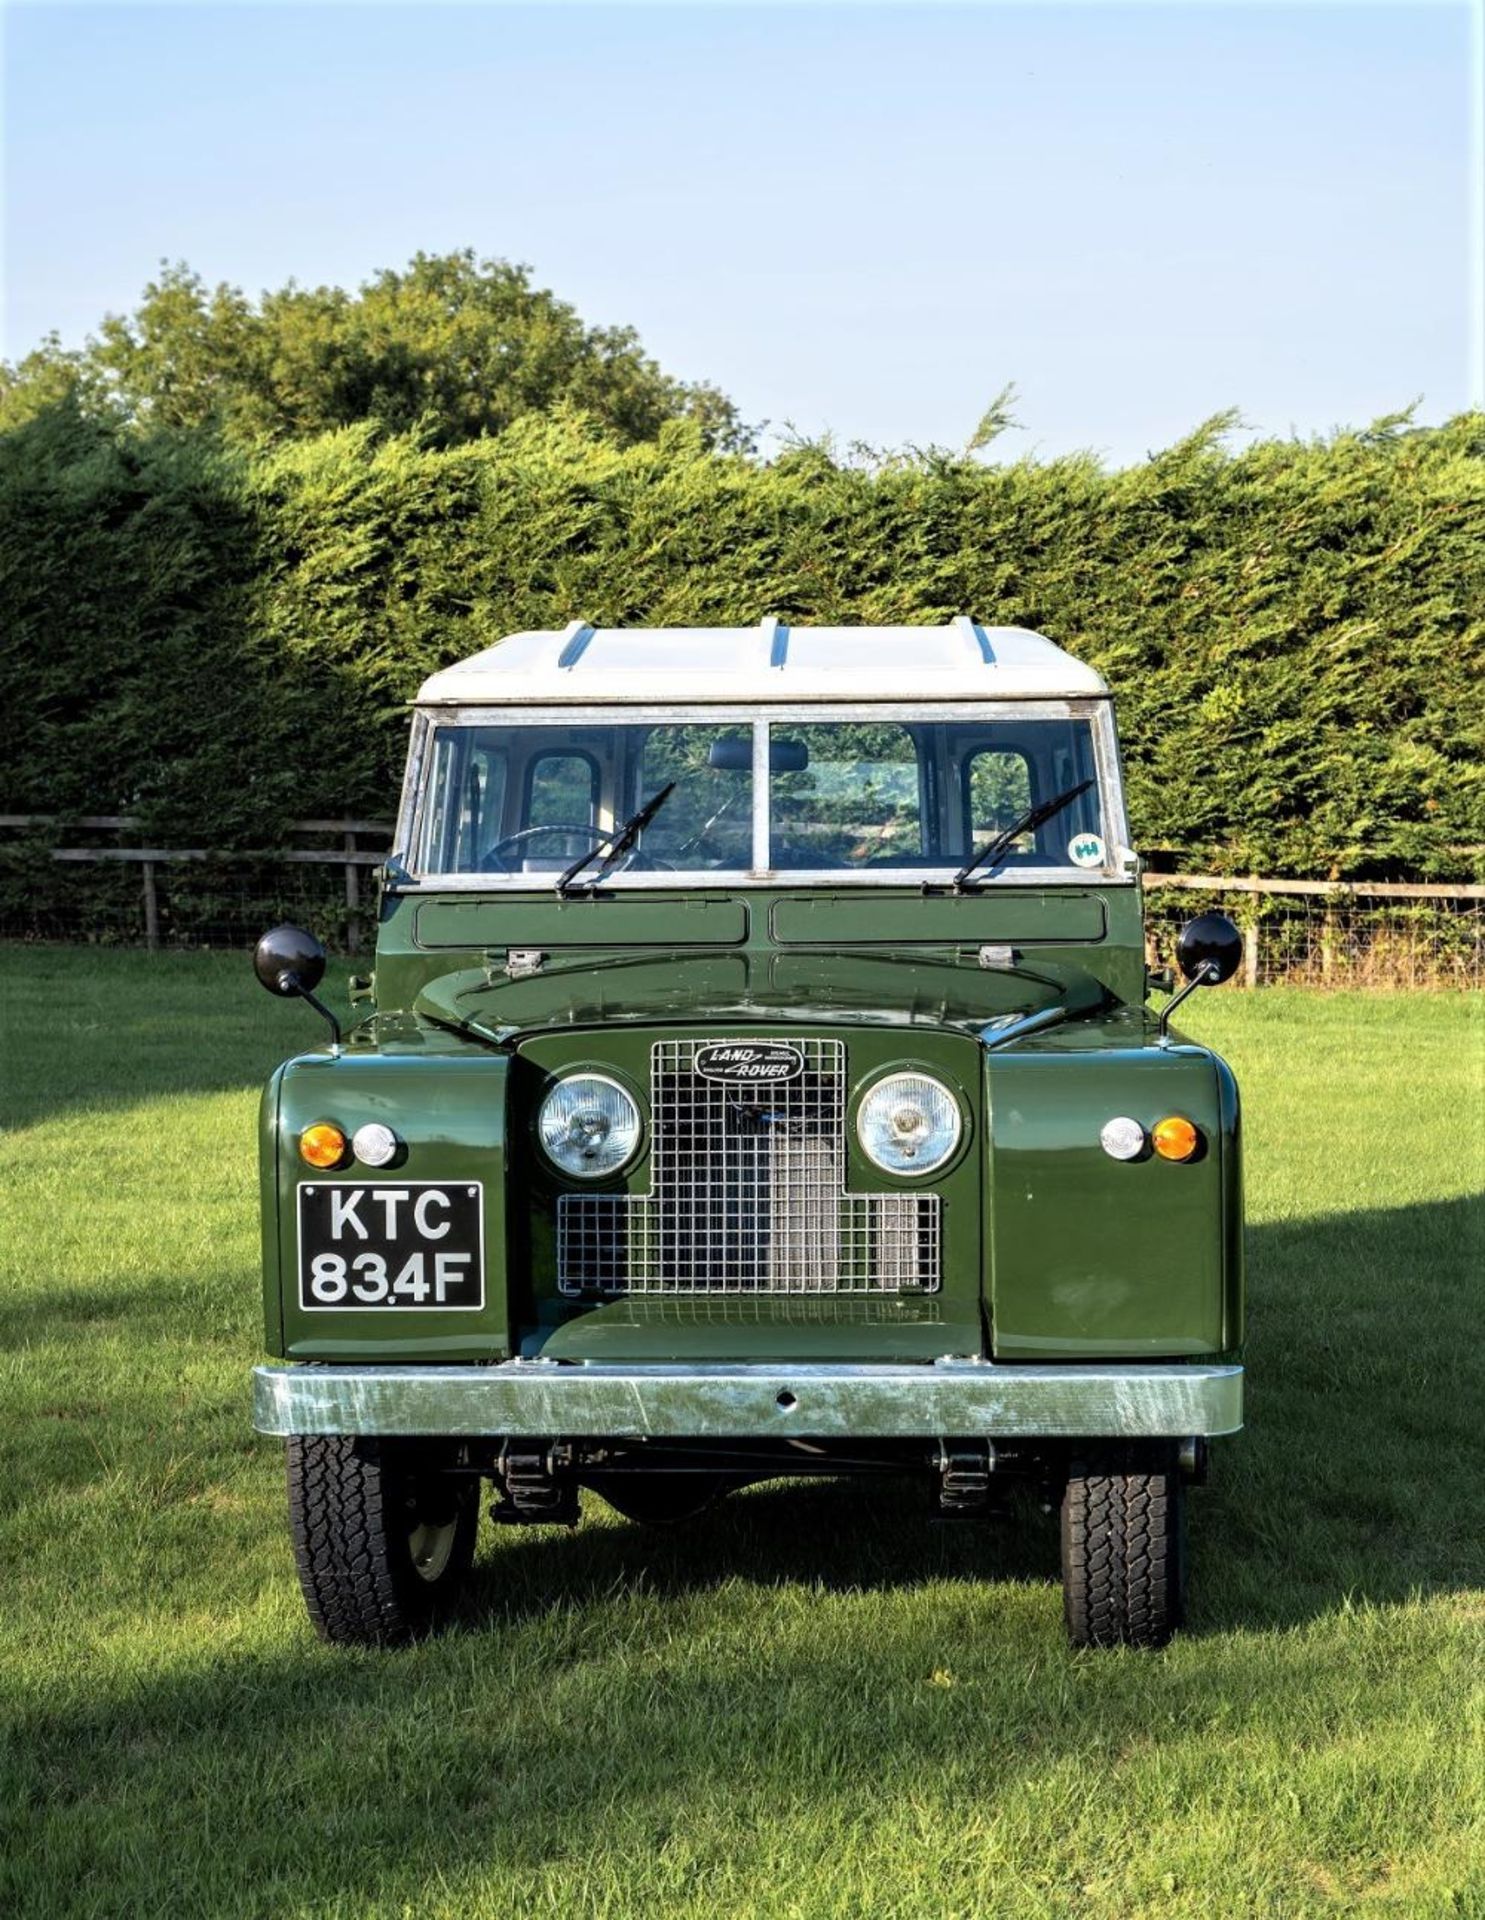 1968 LAND-ROVER SERIES IIA 88” LIGHT UTILITY  Registration Number: KTC 834F - Image 6 of 19